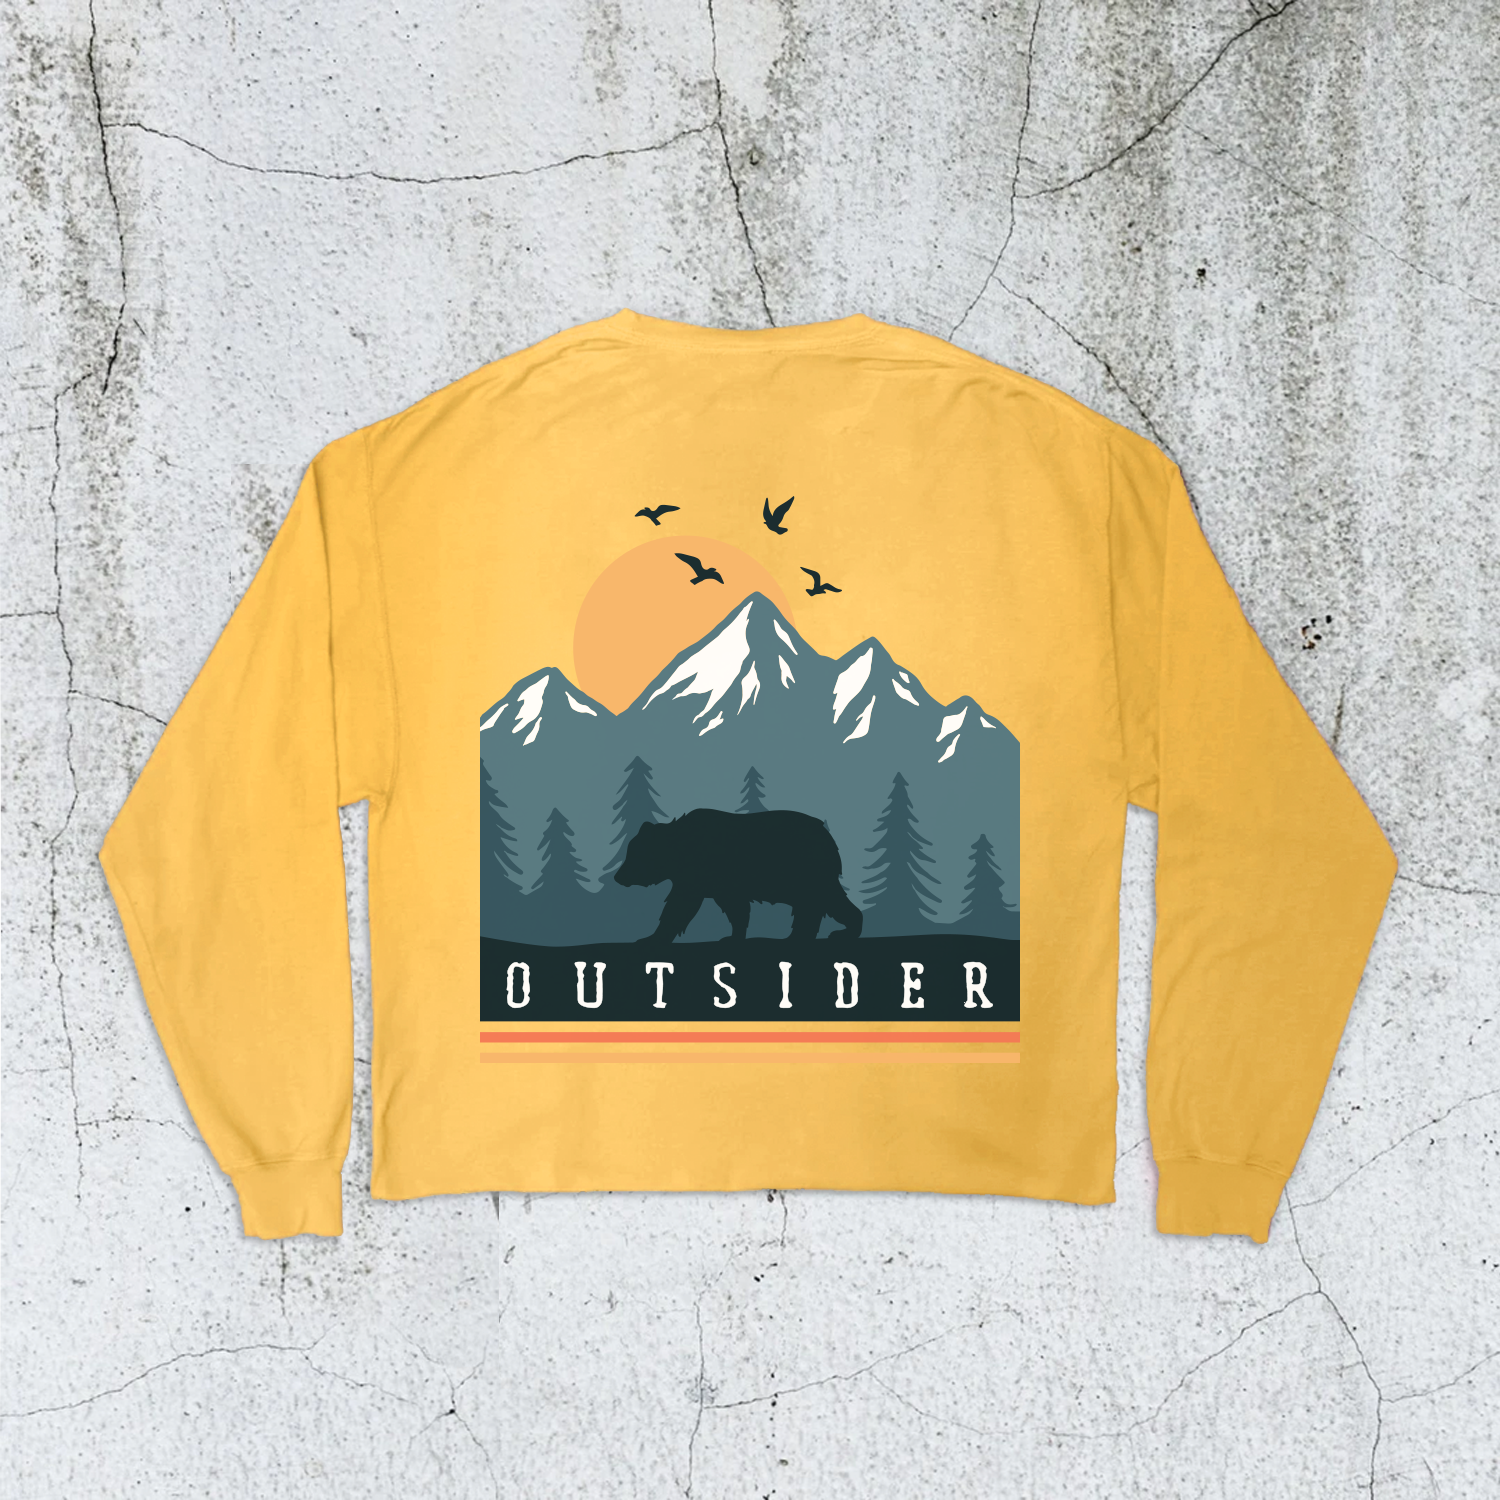 Of These Mountains Outsider Long Sleeve Tee